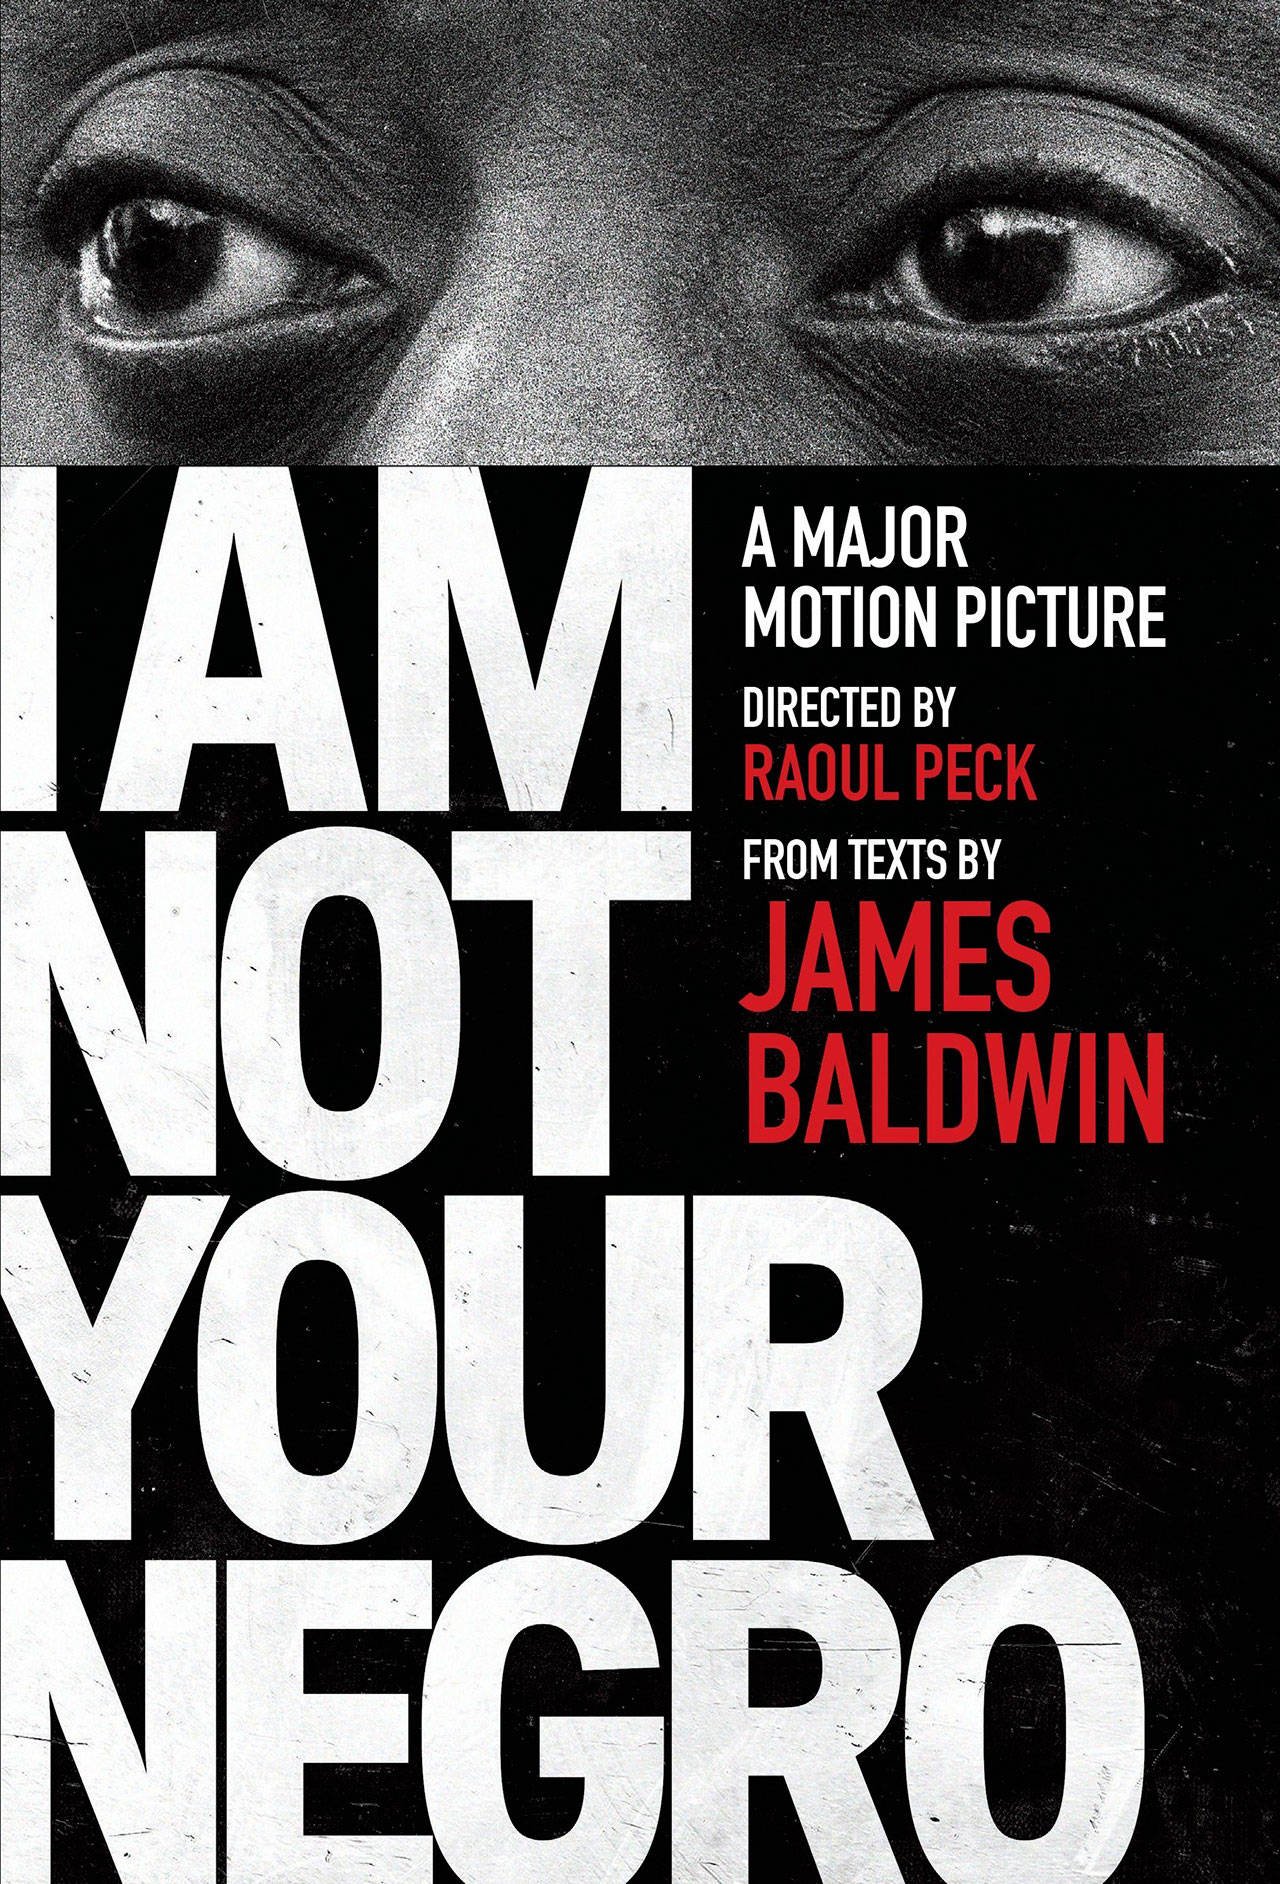 Image courtesy of Magnolia Pictures | The 2016 documentary “I Am Not Your Negro,” based on the writings by James Baldwin, is the first film in the lineup of screenings to be held at the Bainbridge Island Museum of Art as part of the latest iteration of the smARTfilms series on Tuesday, Feb. 11.